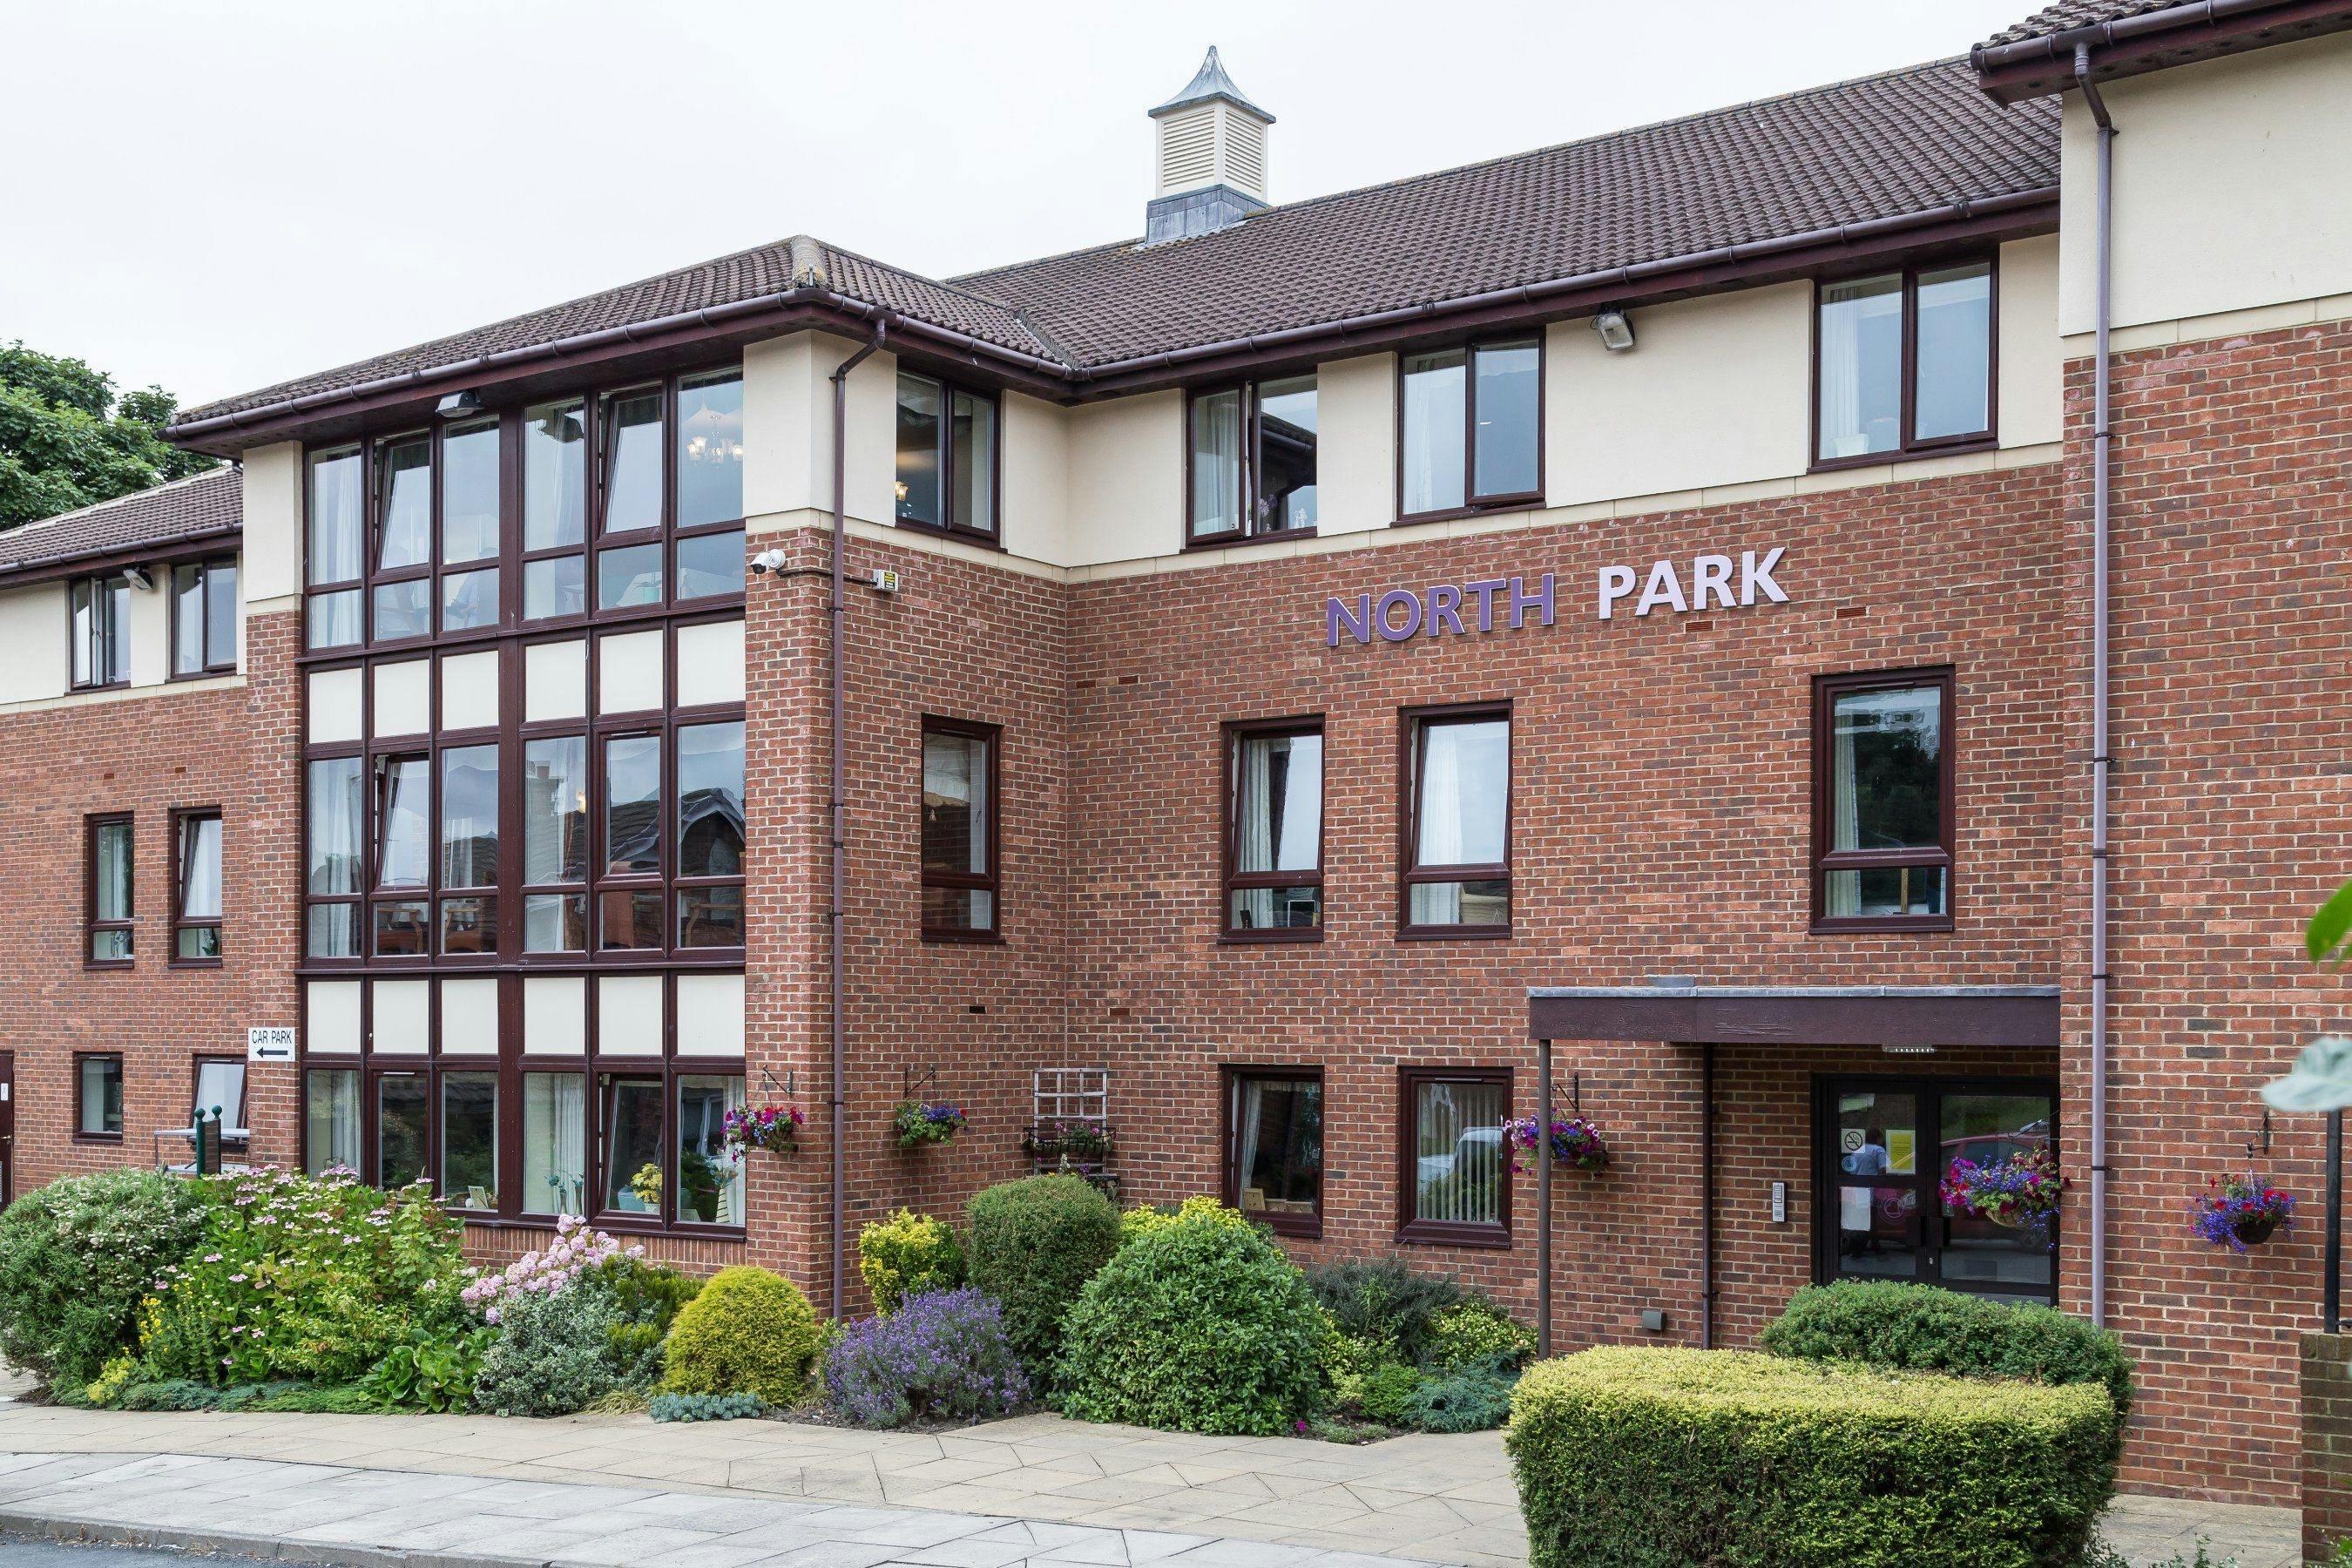 Exterior of North Park Care Home in Darlington, North East England